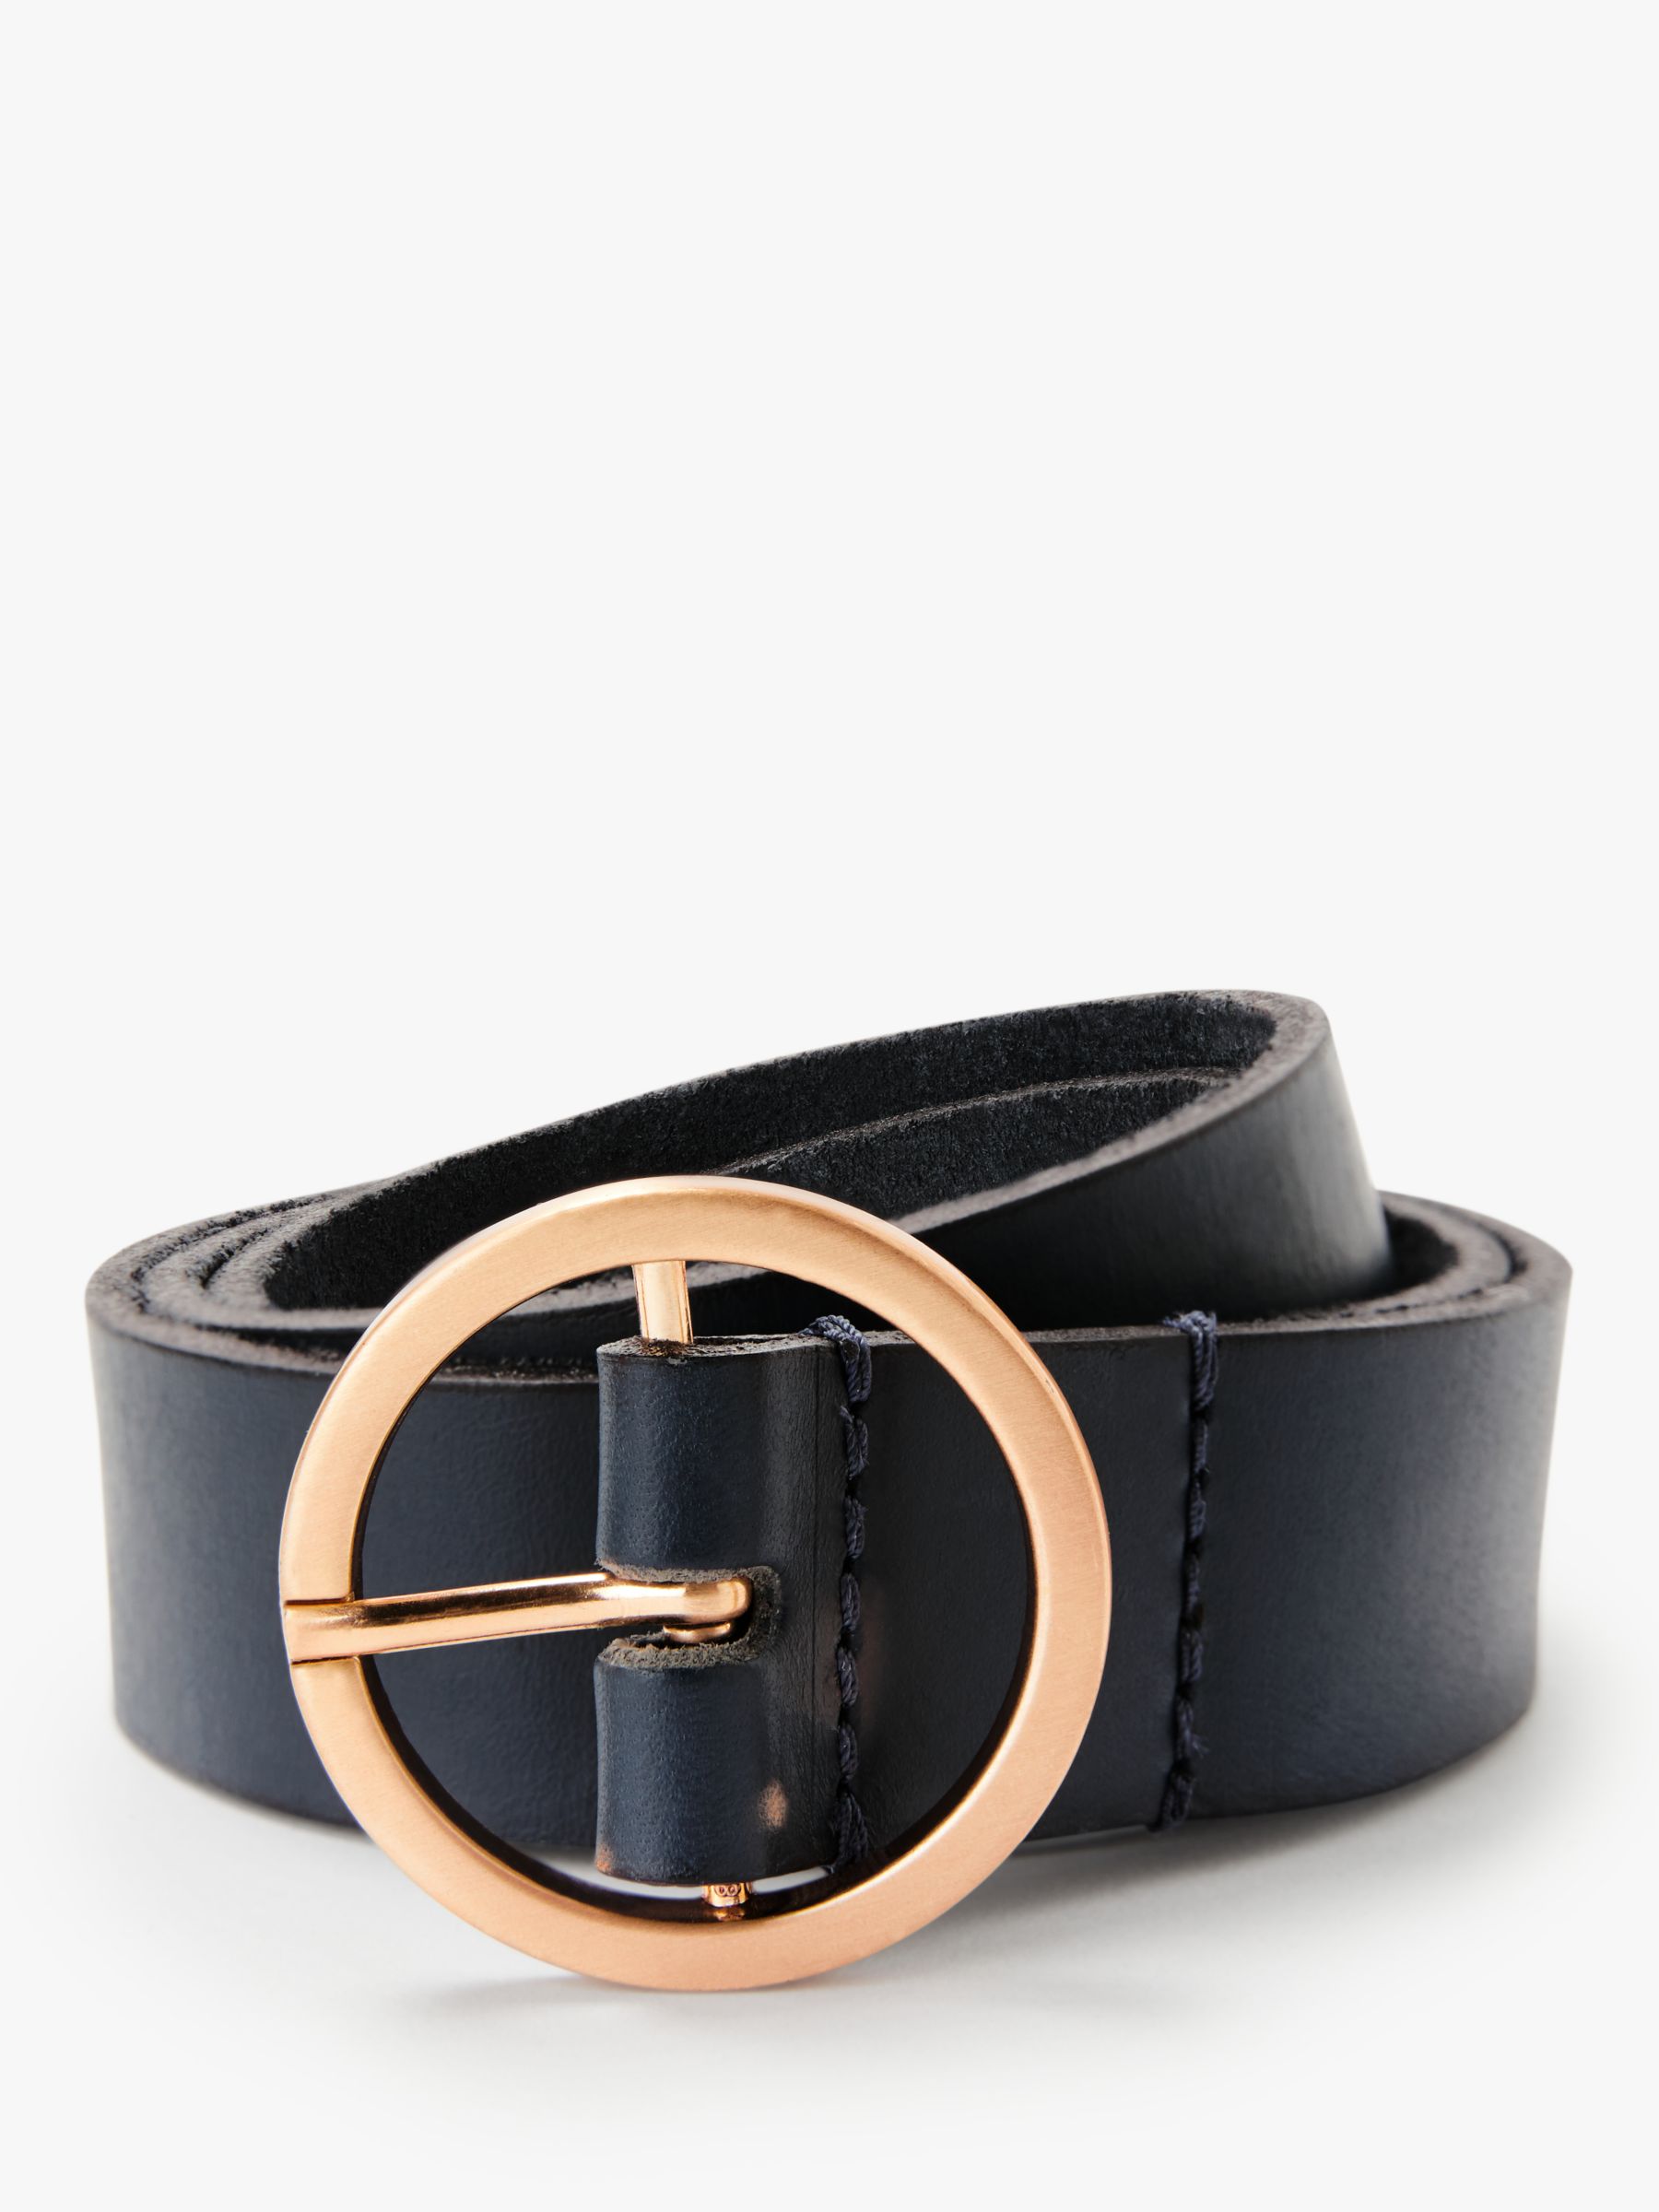 Boden Classic Leather Jeans Belt